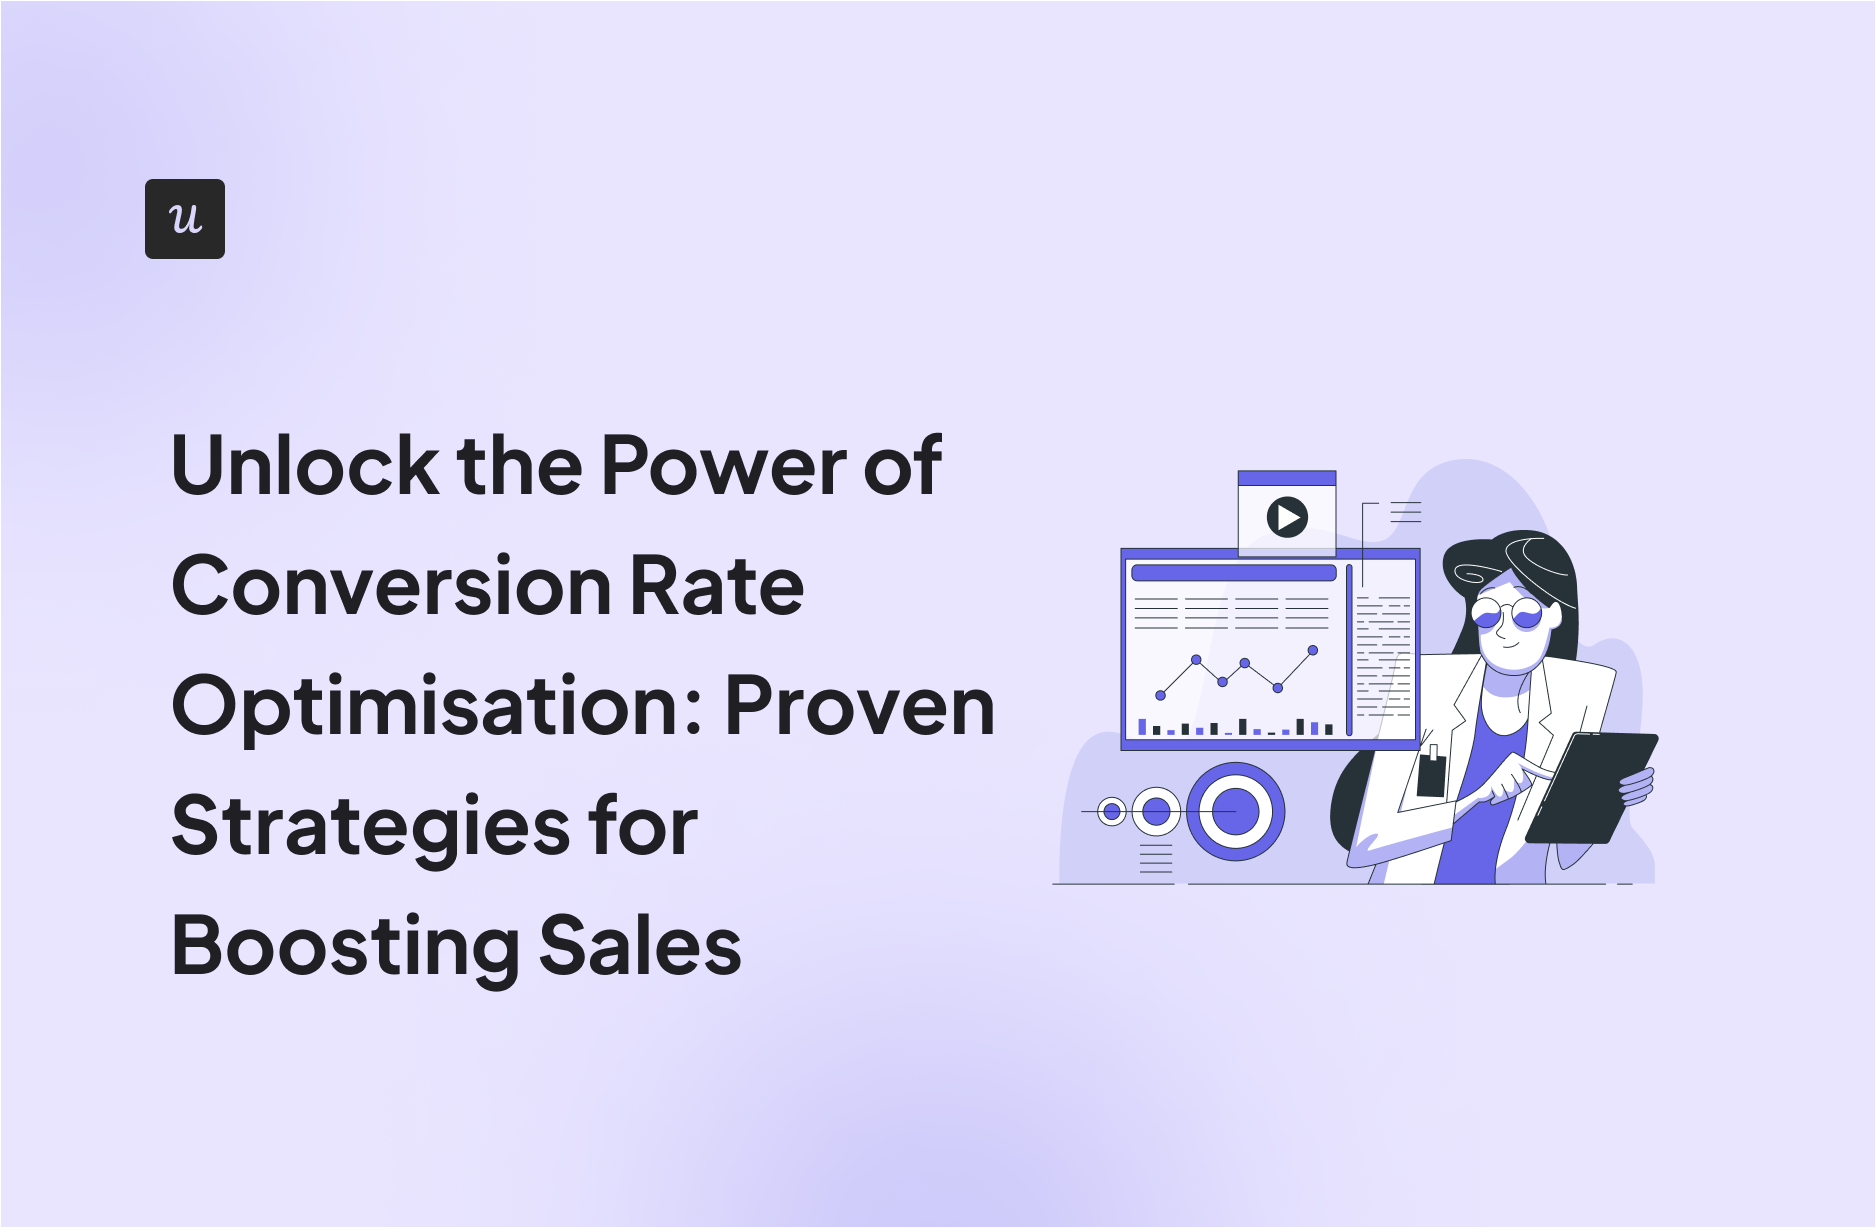 Unlock the Power of Conversion Rate Optimisation: Proven Strategies for Boosting Sales